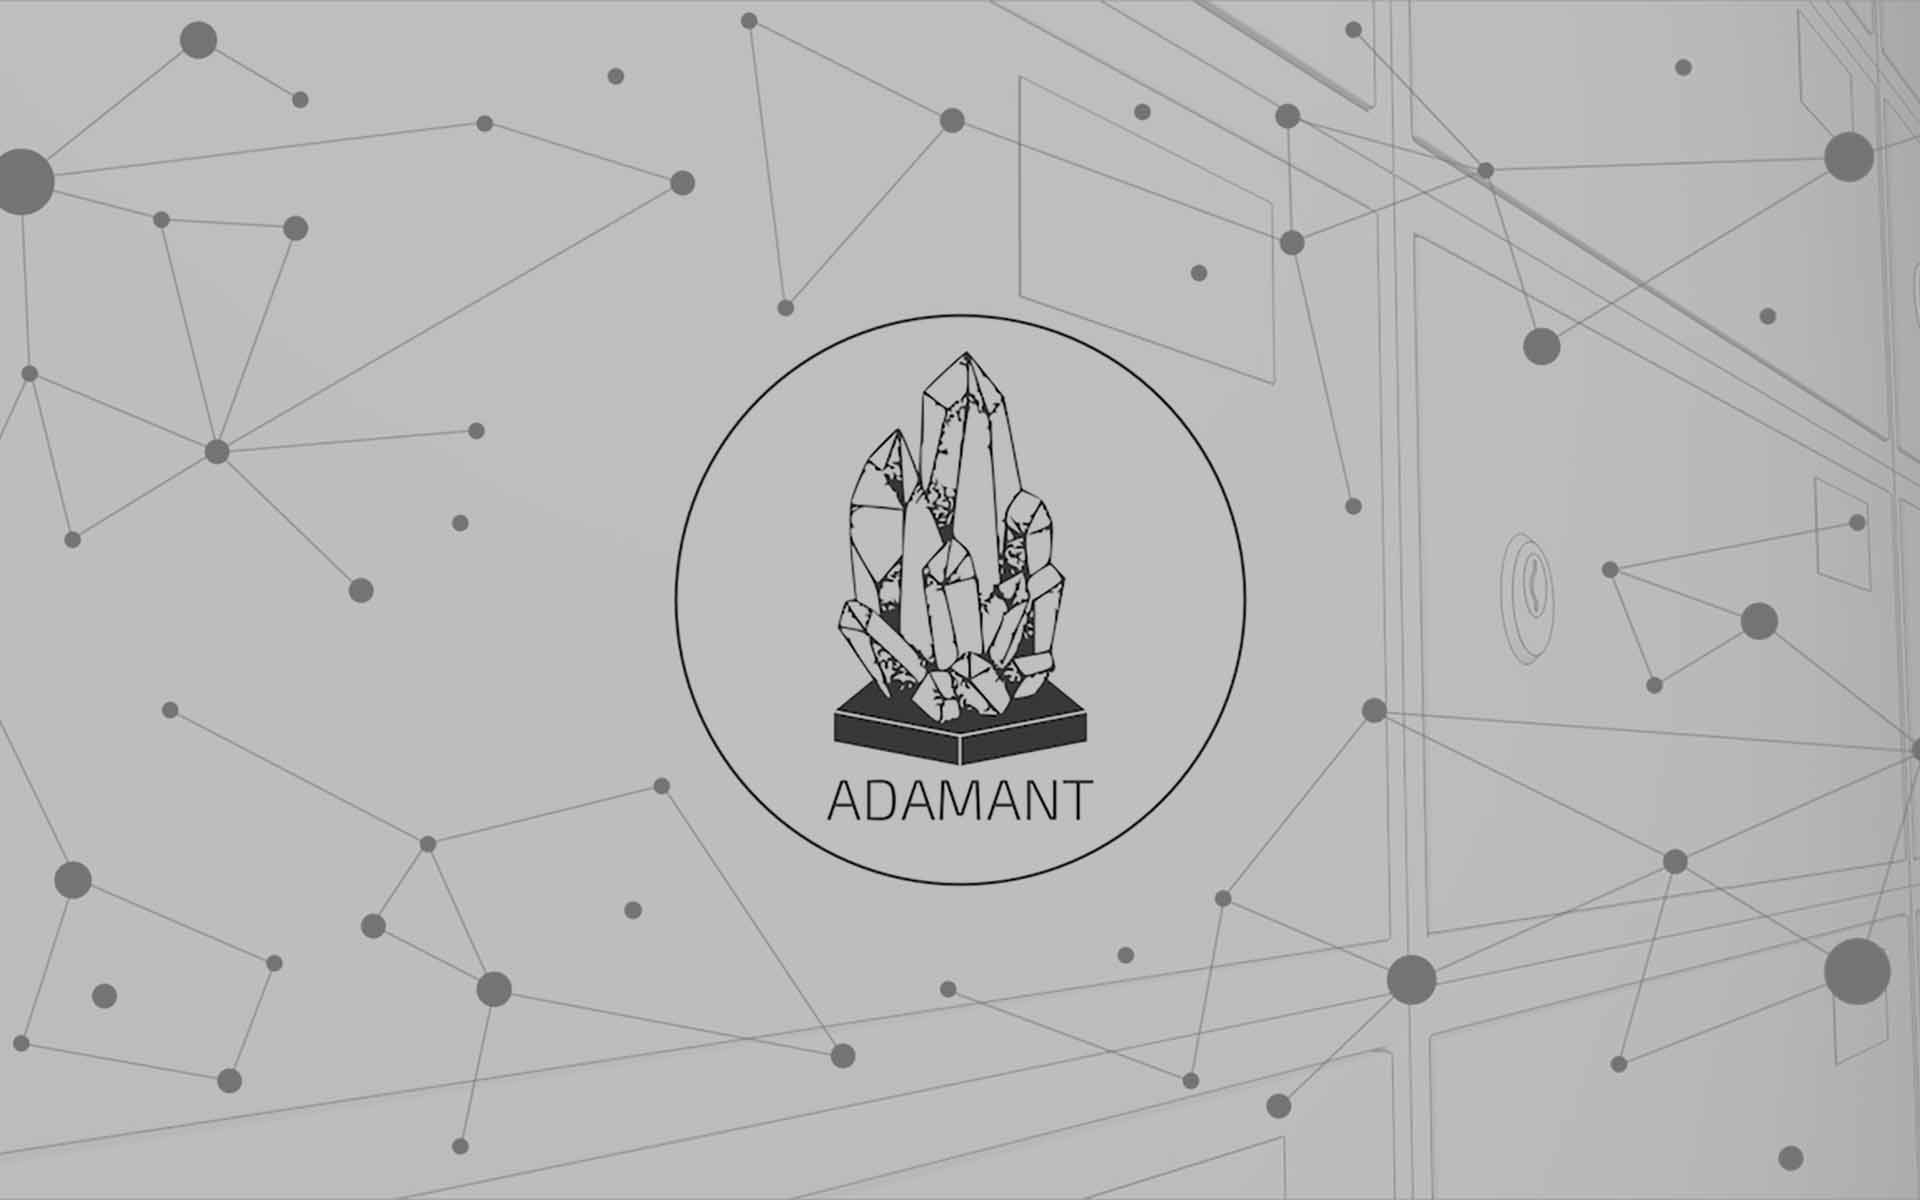 Full Data Security and Anonymity with the Adamant Messenger, That Completes the Pre-ICO